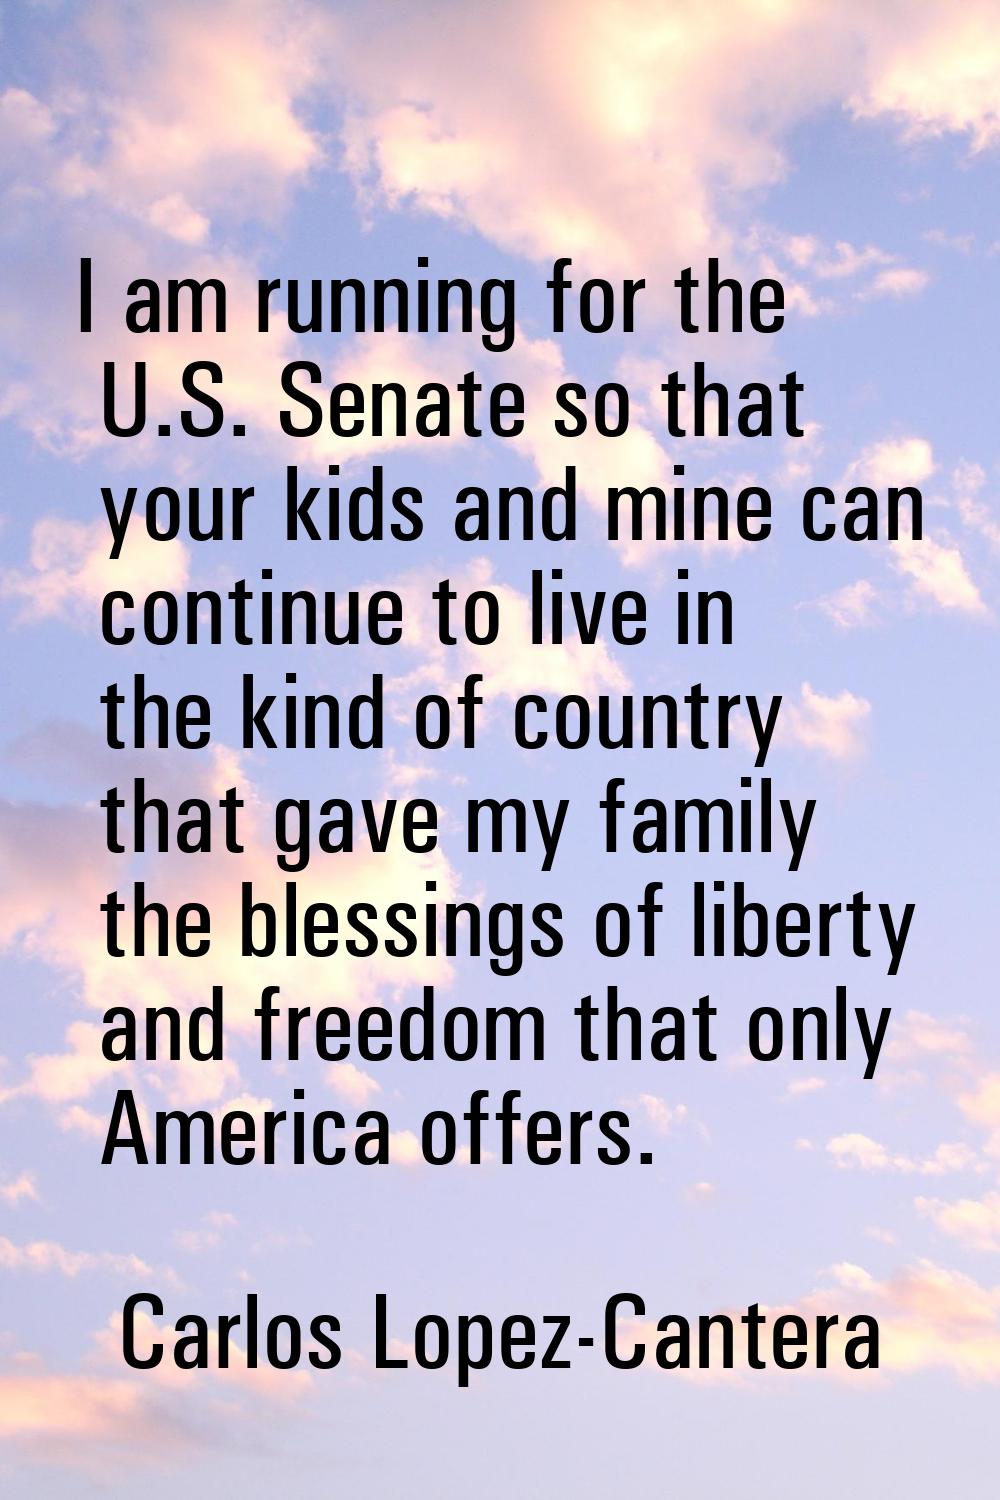 I am running for the U.S. Senate so that your kids and mine can continue to live in the kind of cou